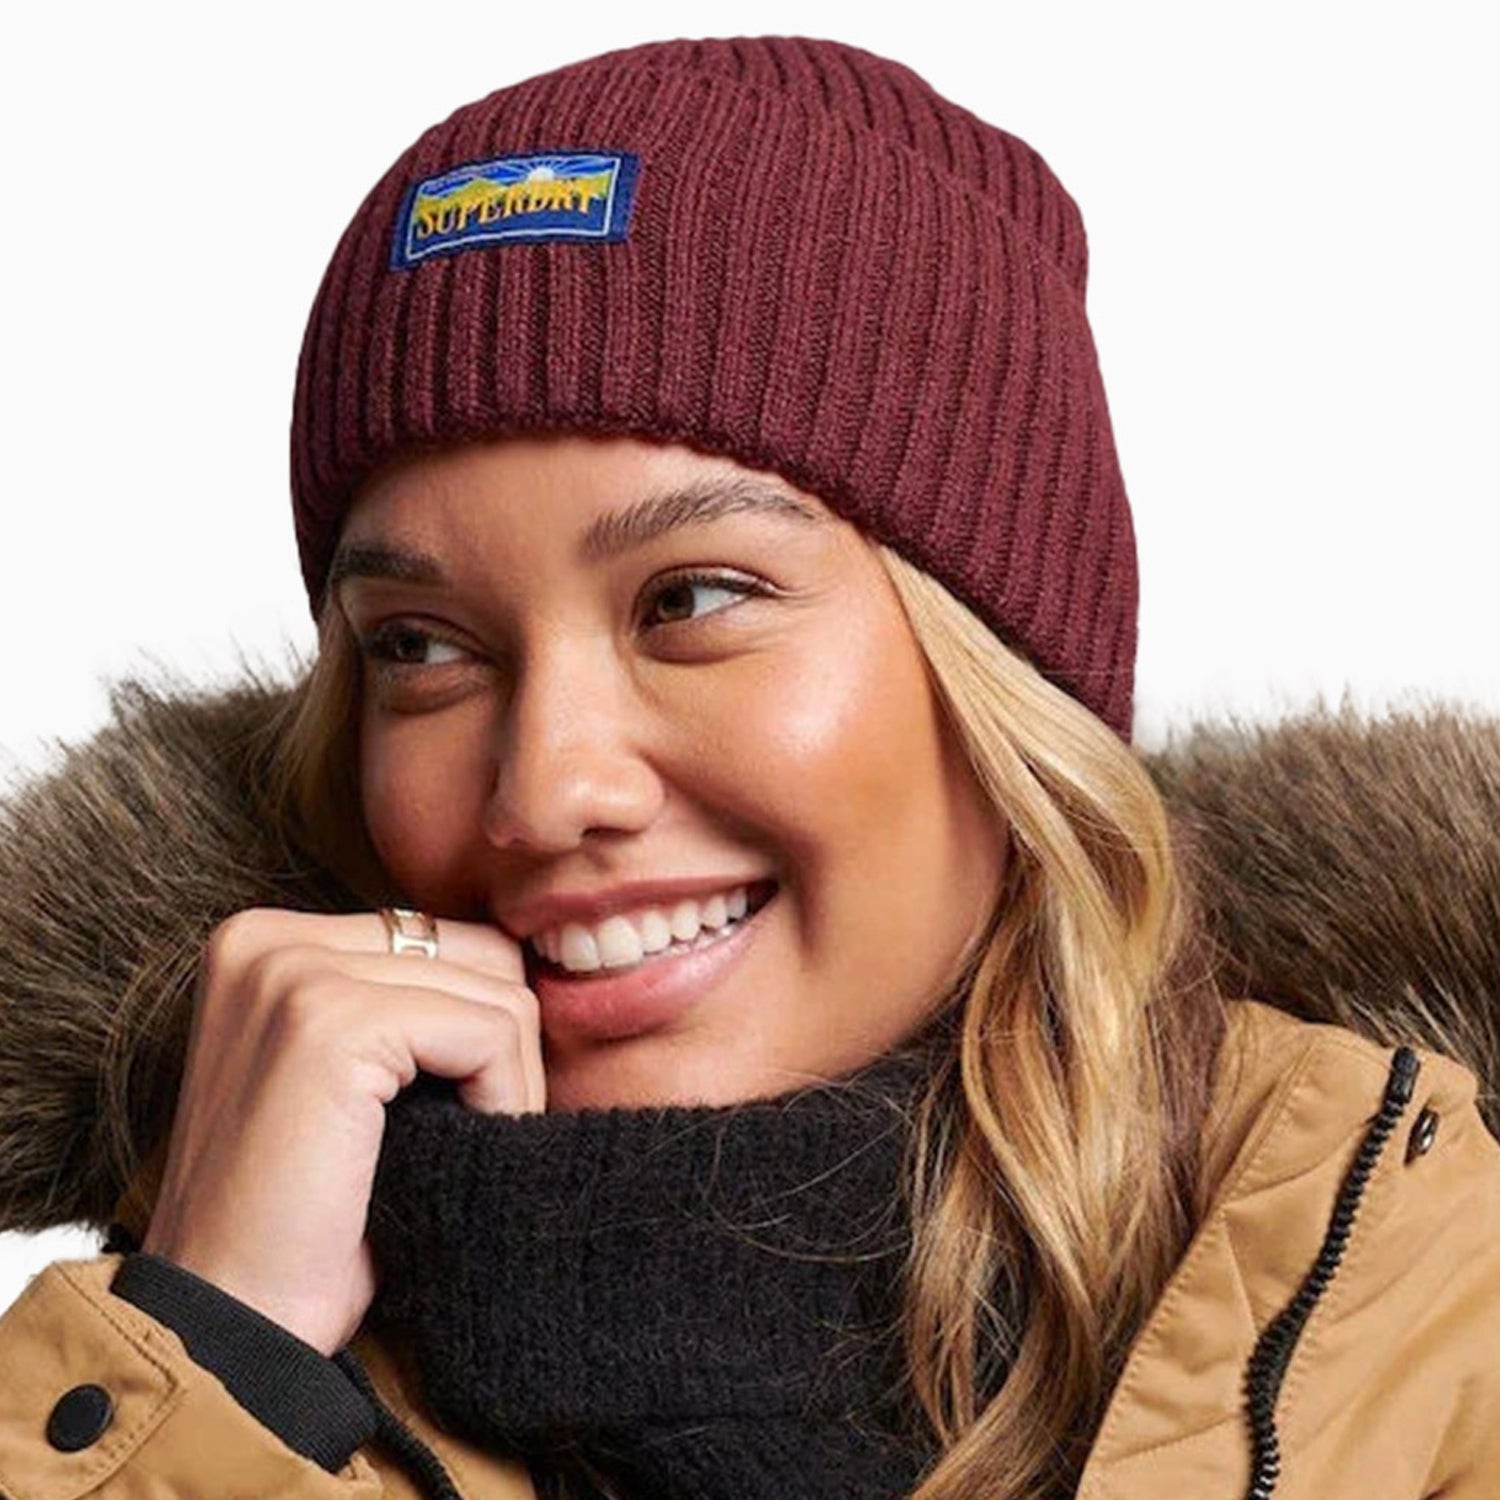 Superdry Unisex Wool Blend Radar Beanie - Color: Port - Tops and Bottoms USA -